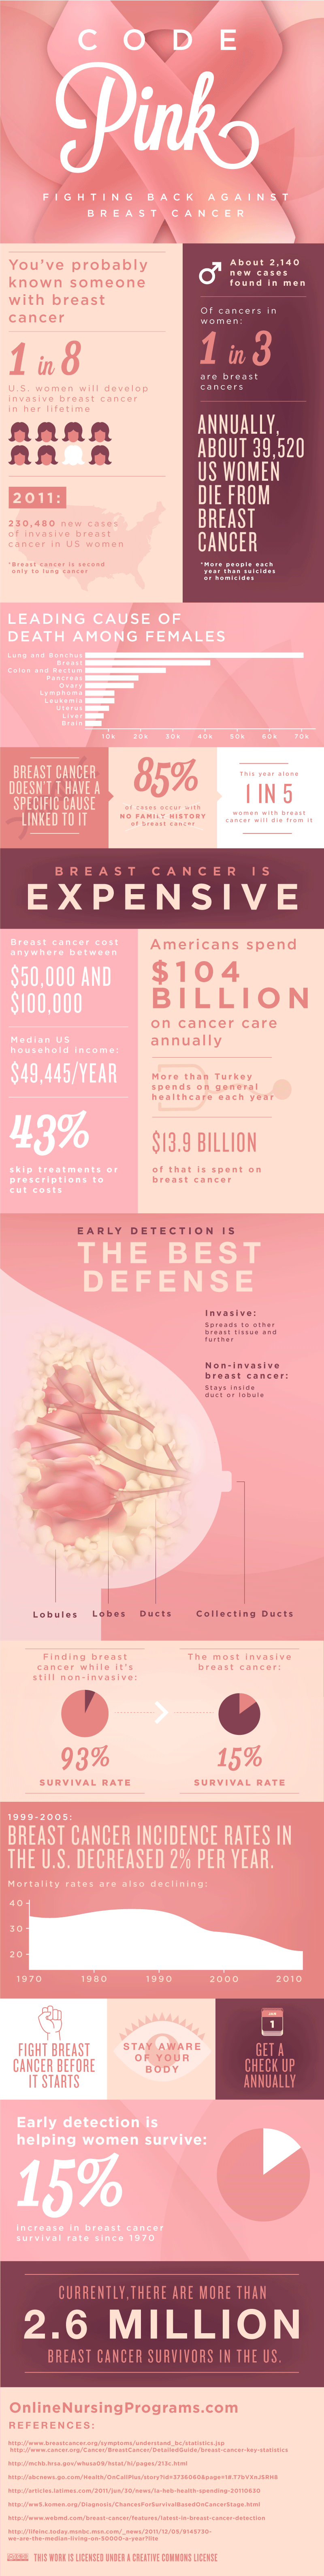 Infographic about breast cancer